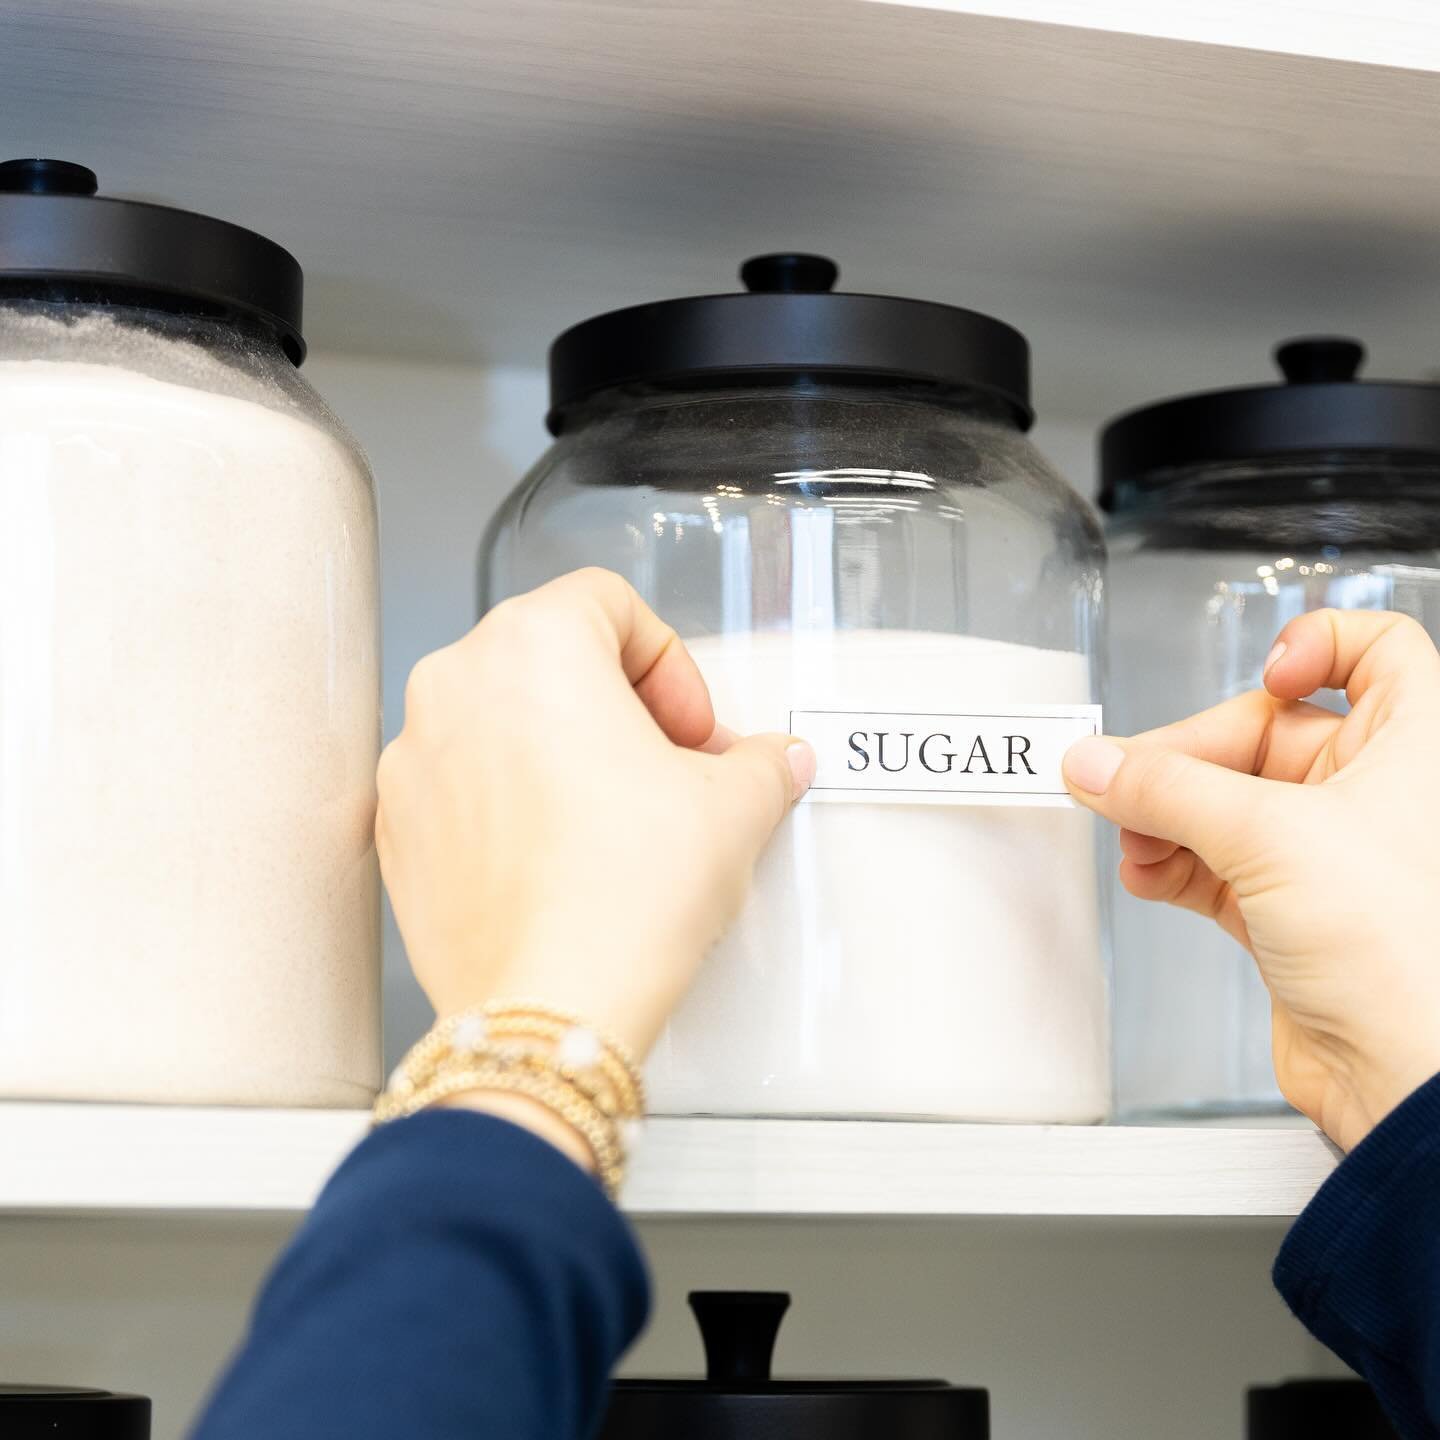 Life is sweet - especially when everything&rsquo;s in its place &amp; labeled! 🍭✨

Whether it&rsquo;s your kitchen pantry or your home office, the importance of labels can&rsquo;t be overstated when it comes to achieving and maintaining order. Label